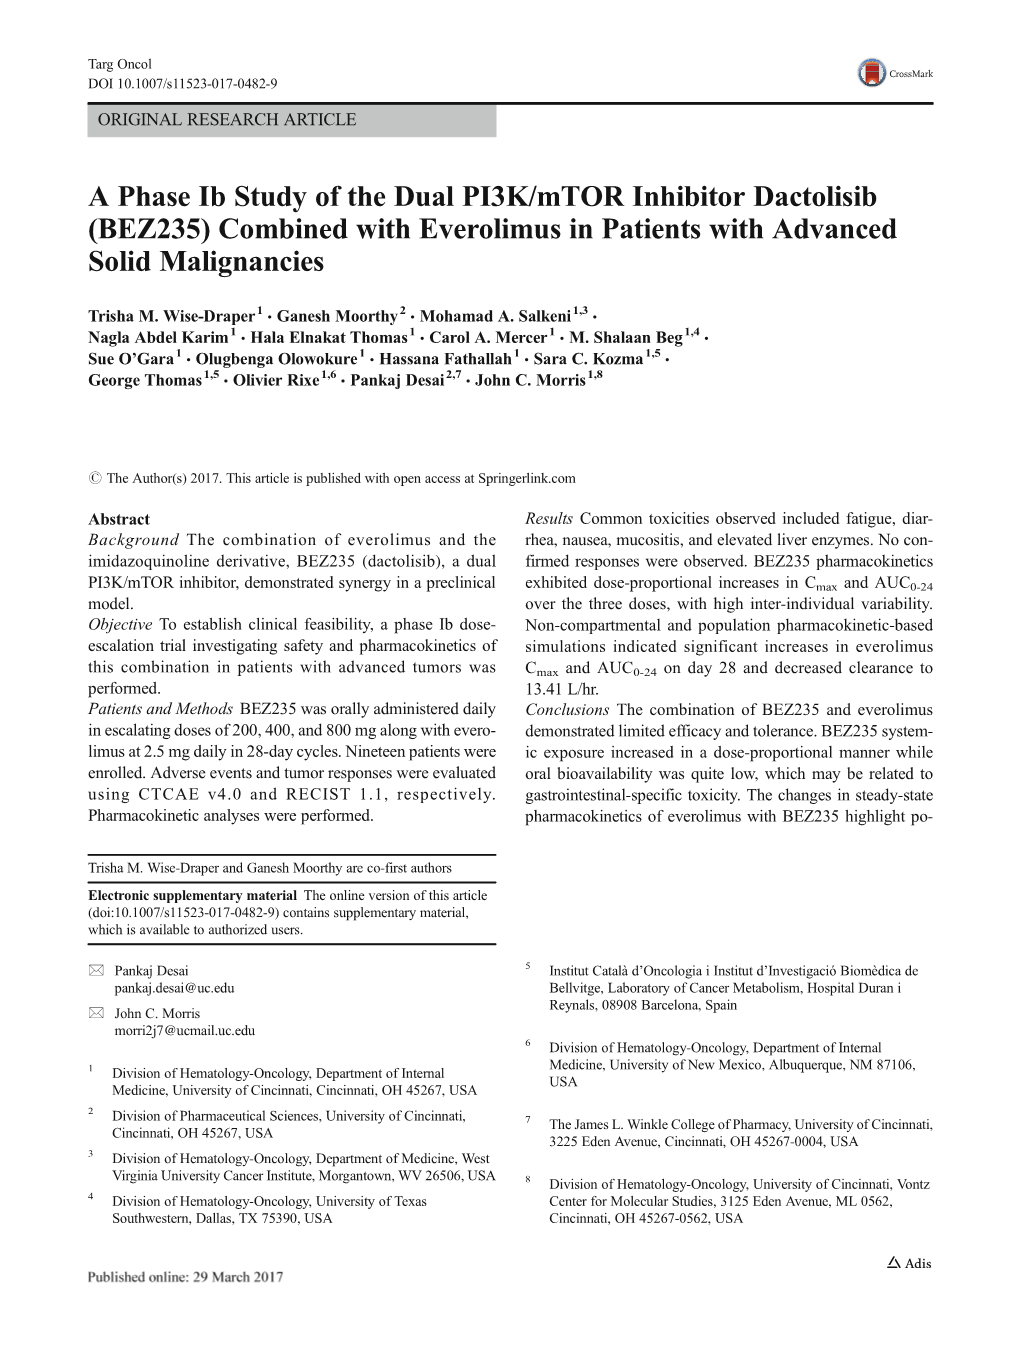 A Phase Ib Study of the Dual PI3K/Mtor Inhibitor Dactolisib (BEZ235) Combined with Everolimus in Patients with Advanced Solid Malignancies